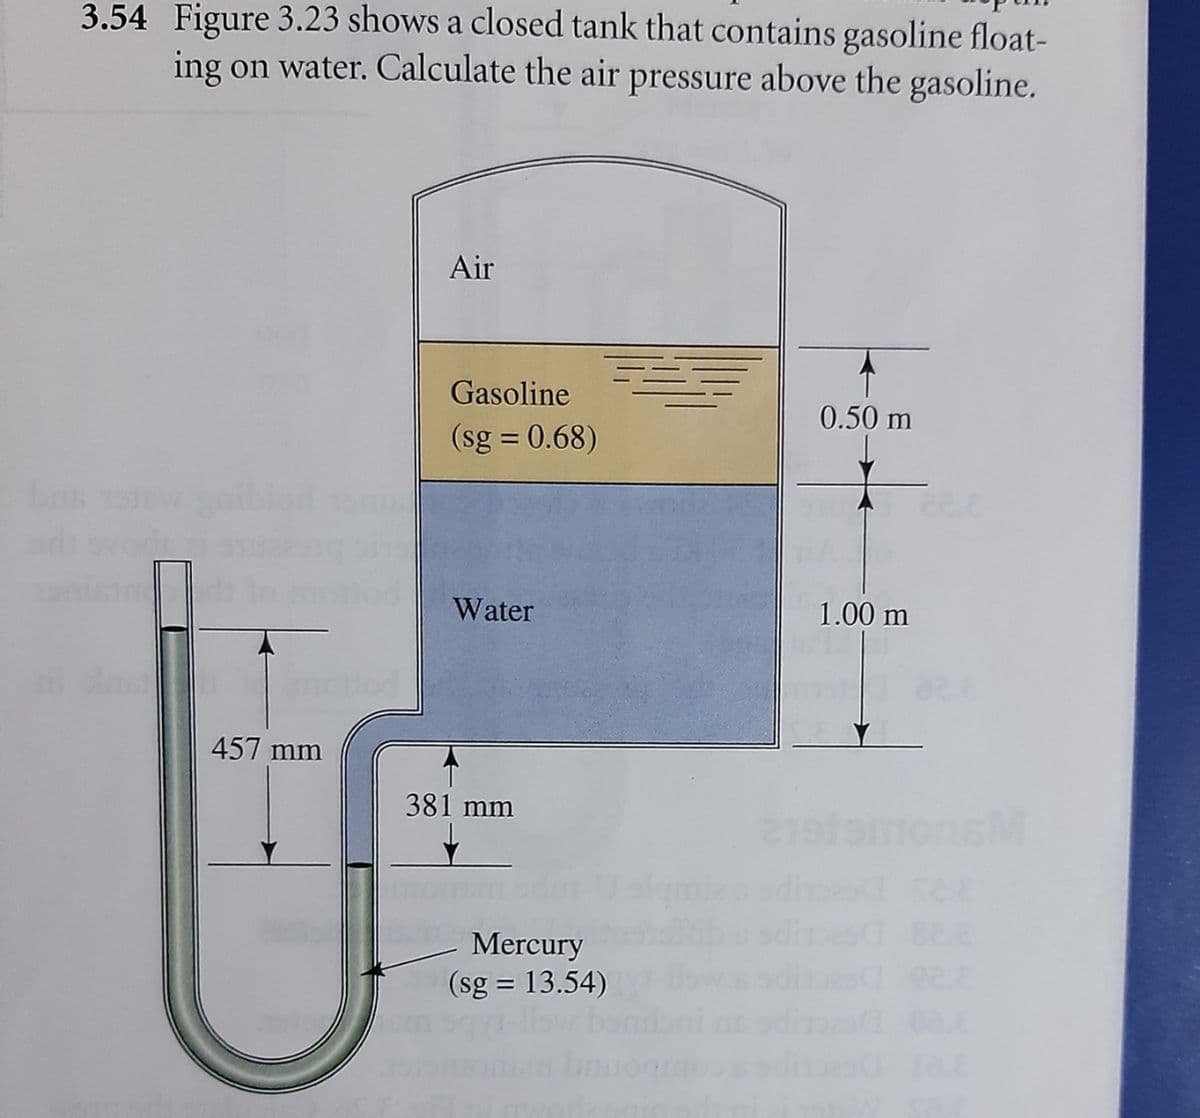 3.54 Figure 3.23 shows a closed tank that contains gasoline float-
ing on water. Calculate the air pressure above the gasoline.
Air
Gasoline
0.50 m
(sg = 0.68)
Water
1.00 m
457 mm
381 mm
SM
Mercury
(sg = 13.54)
